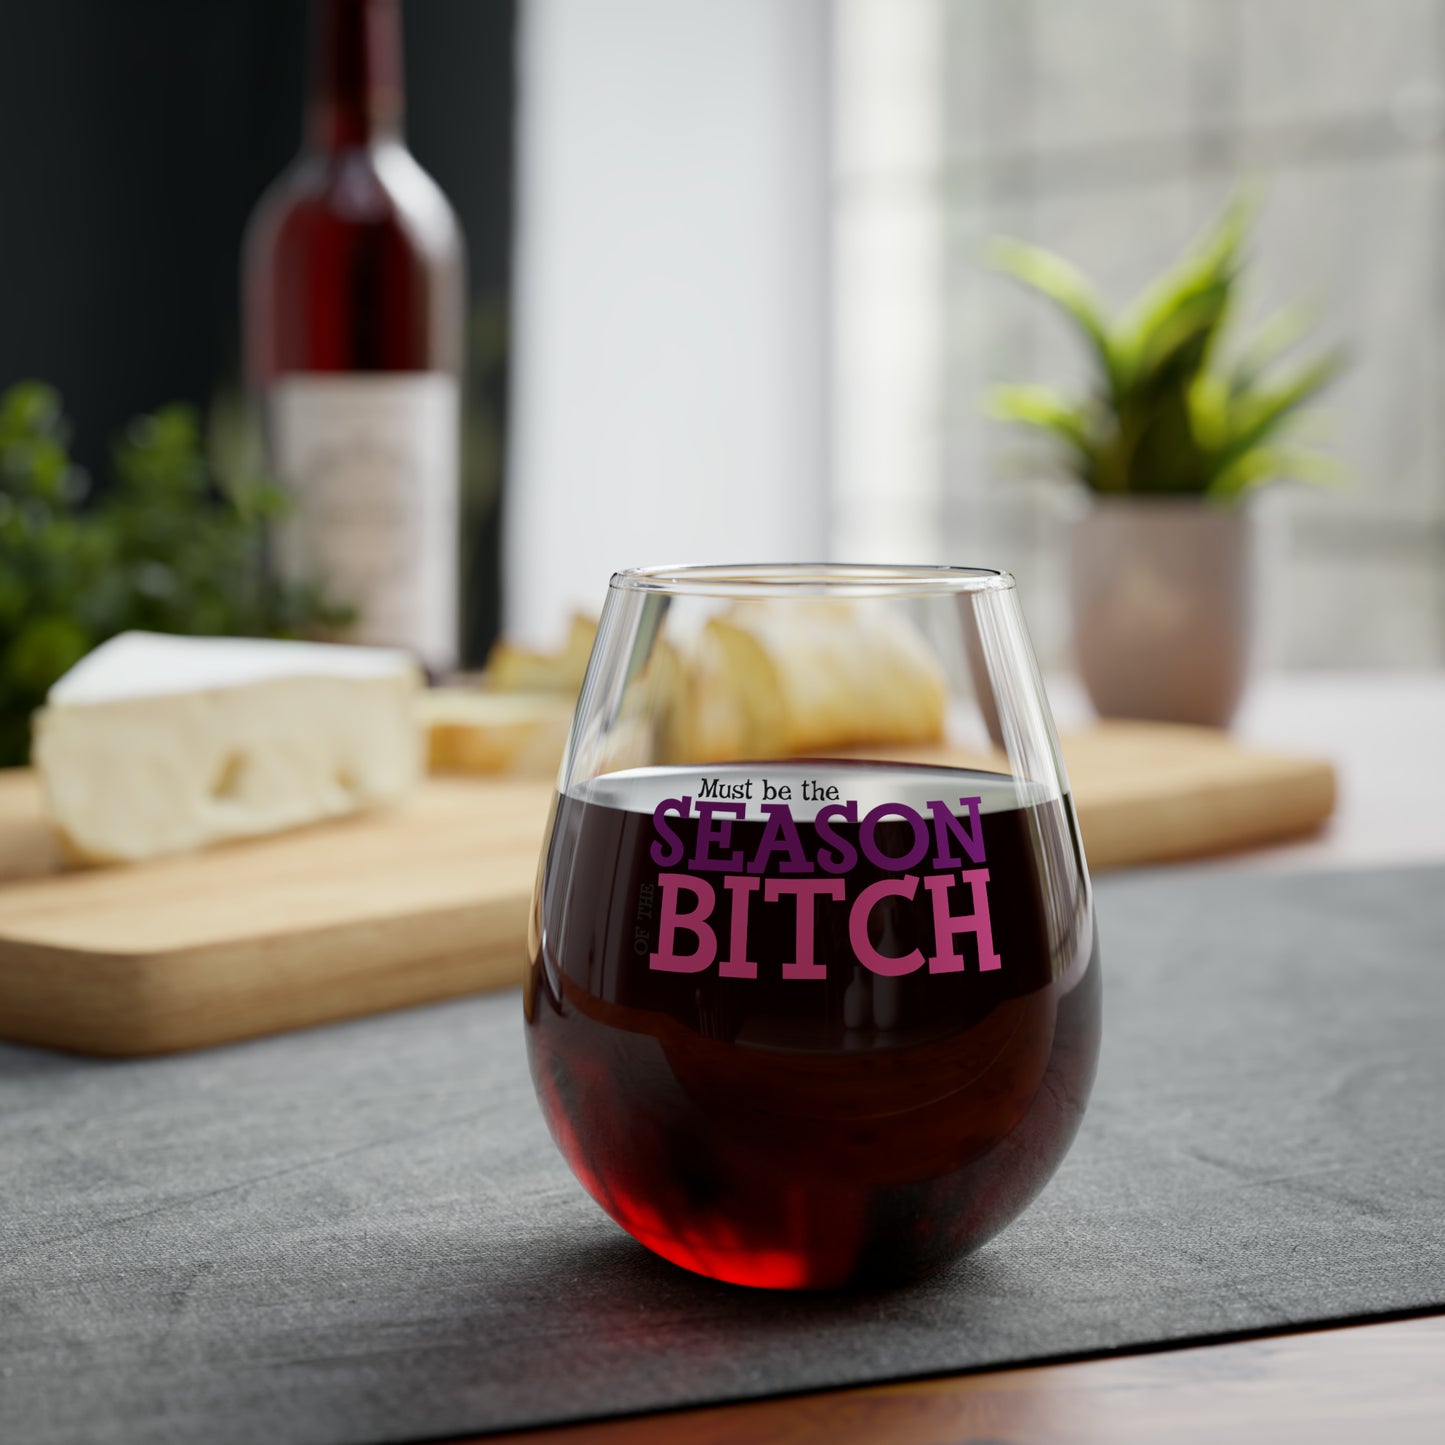 Must be the Season of the Bitch Stemless Wine Glass, 11.75oz